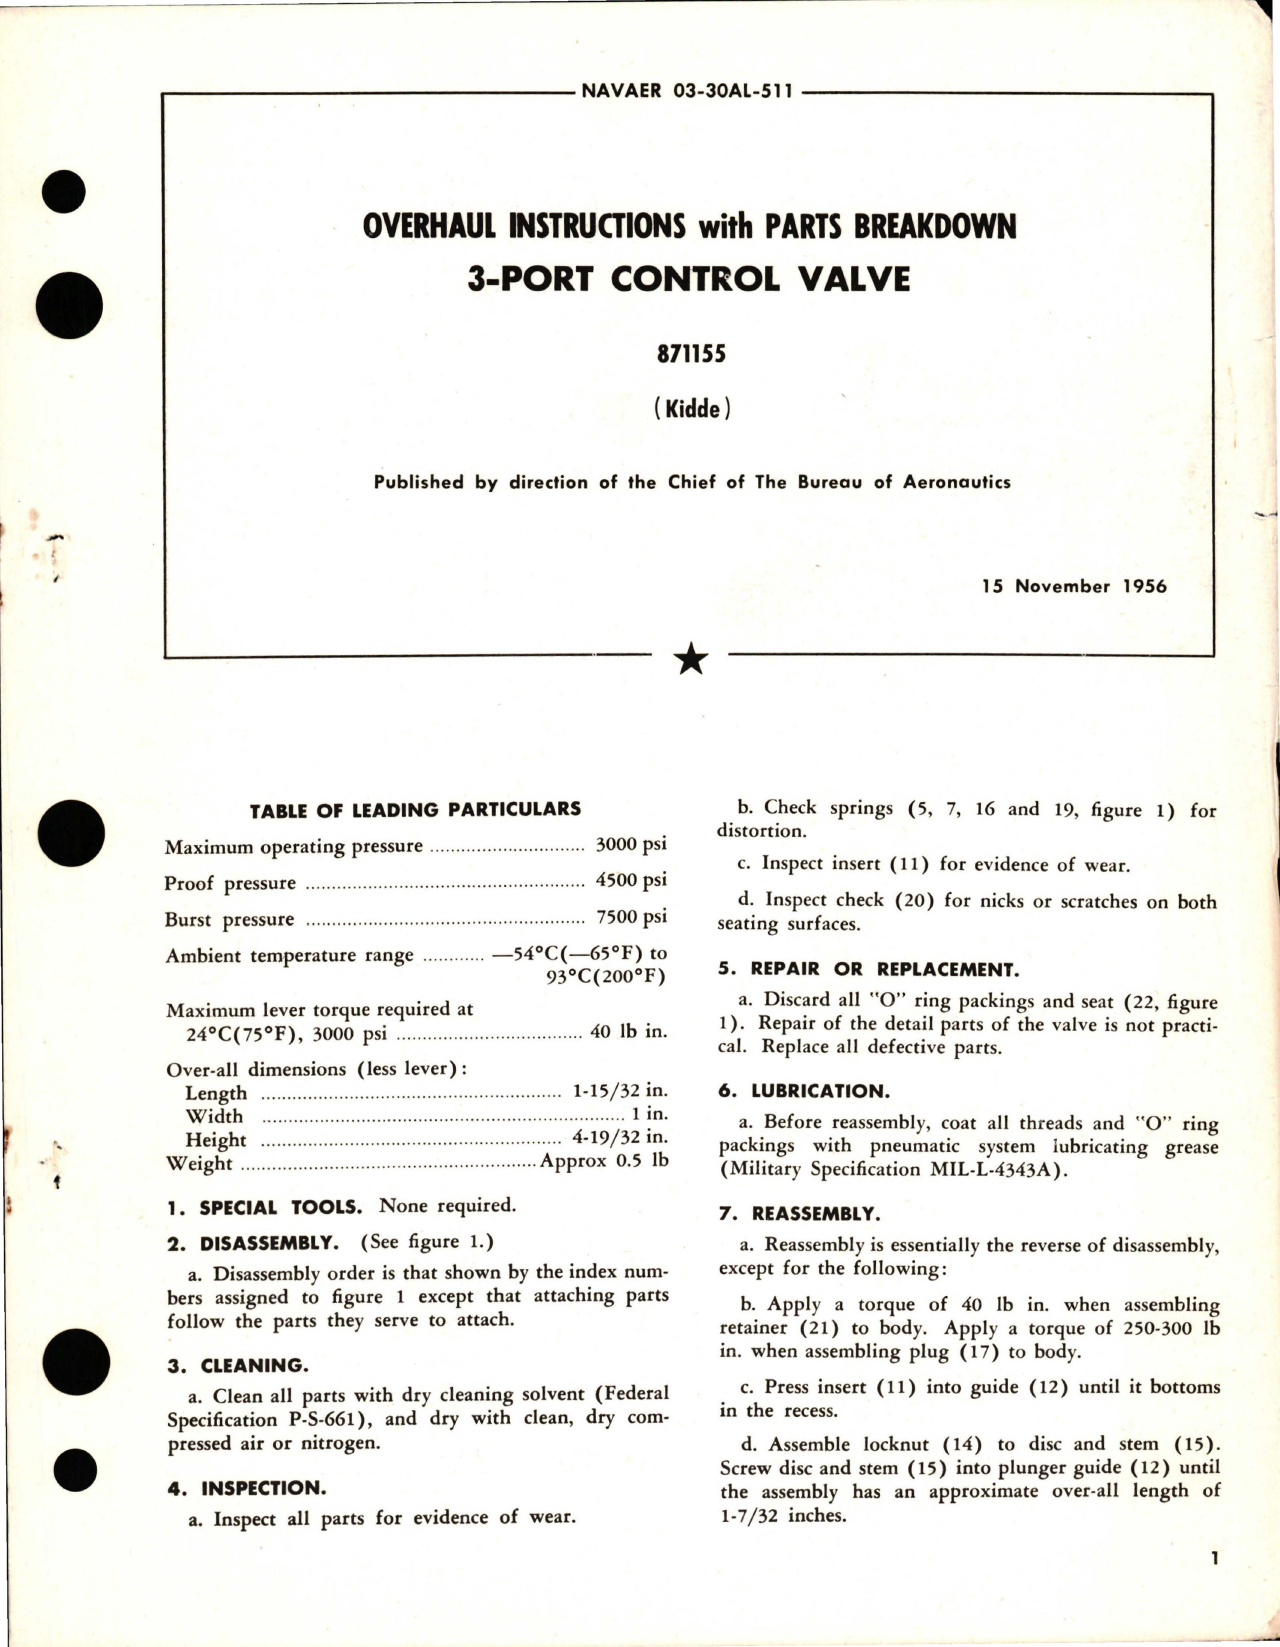 Sample page 1 from AirCorps Library document: Overhaul Instructions with Parts Breakdown for 3-Port Control Valve - 871155 